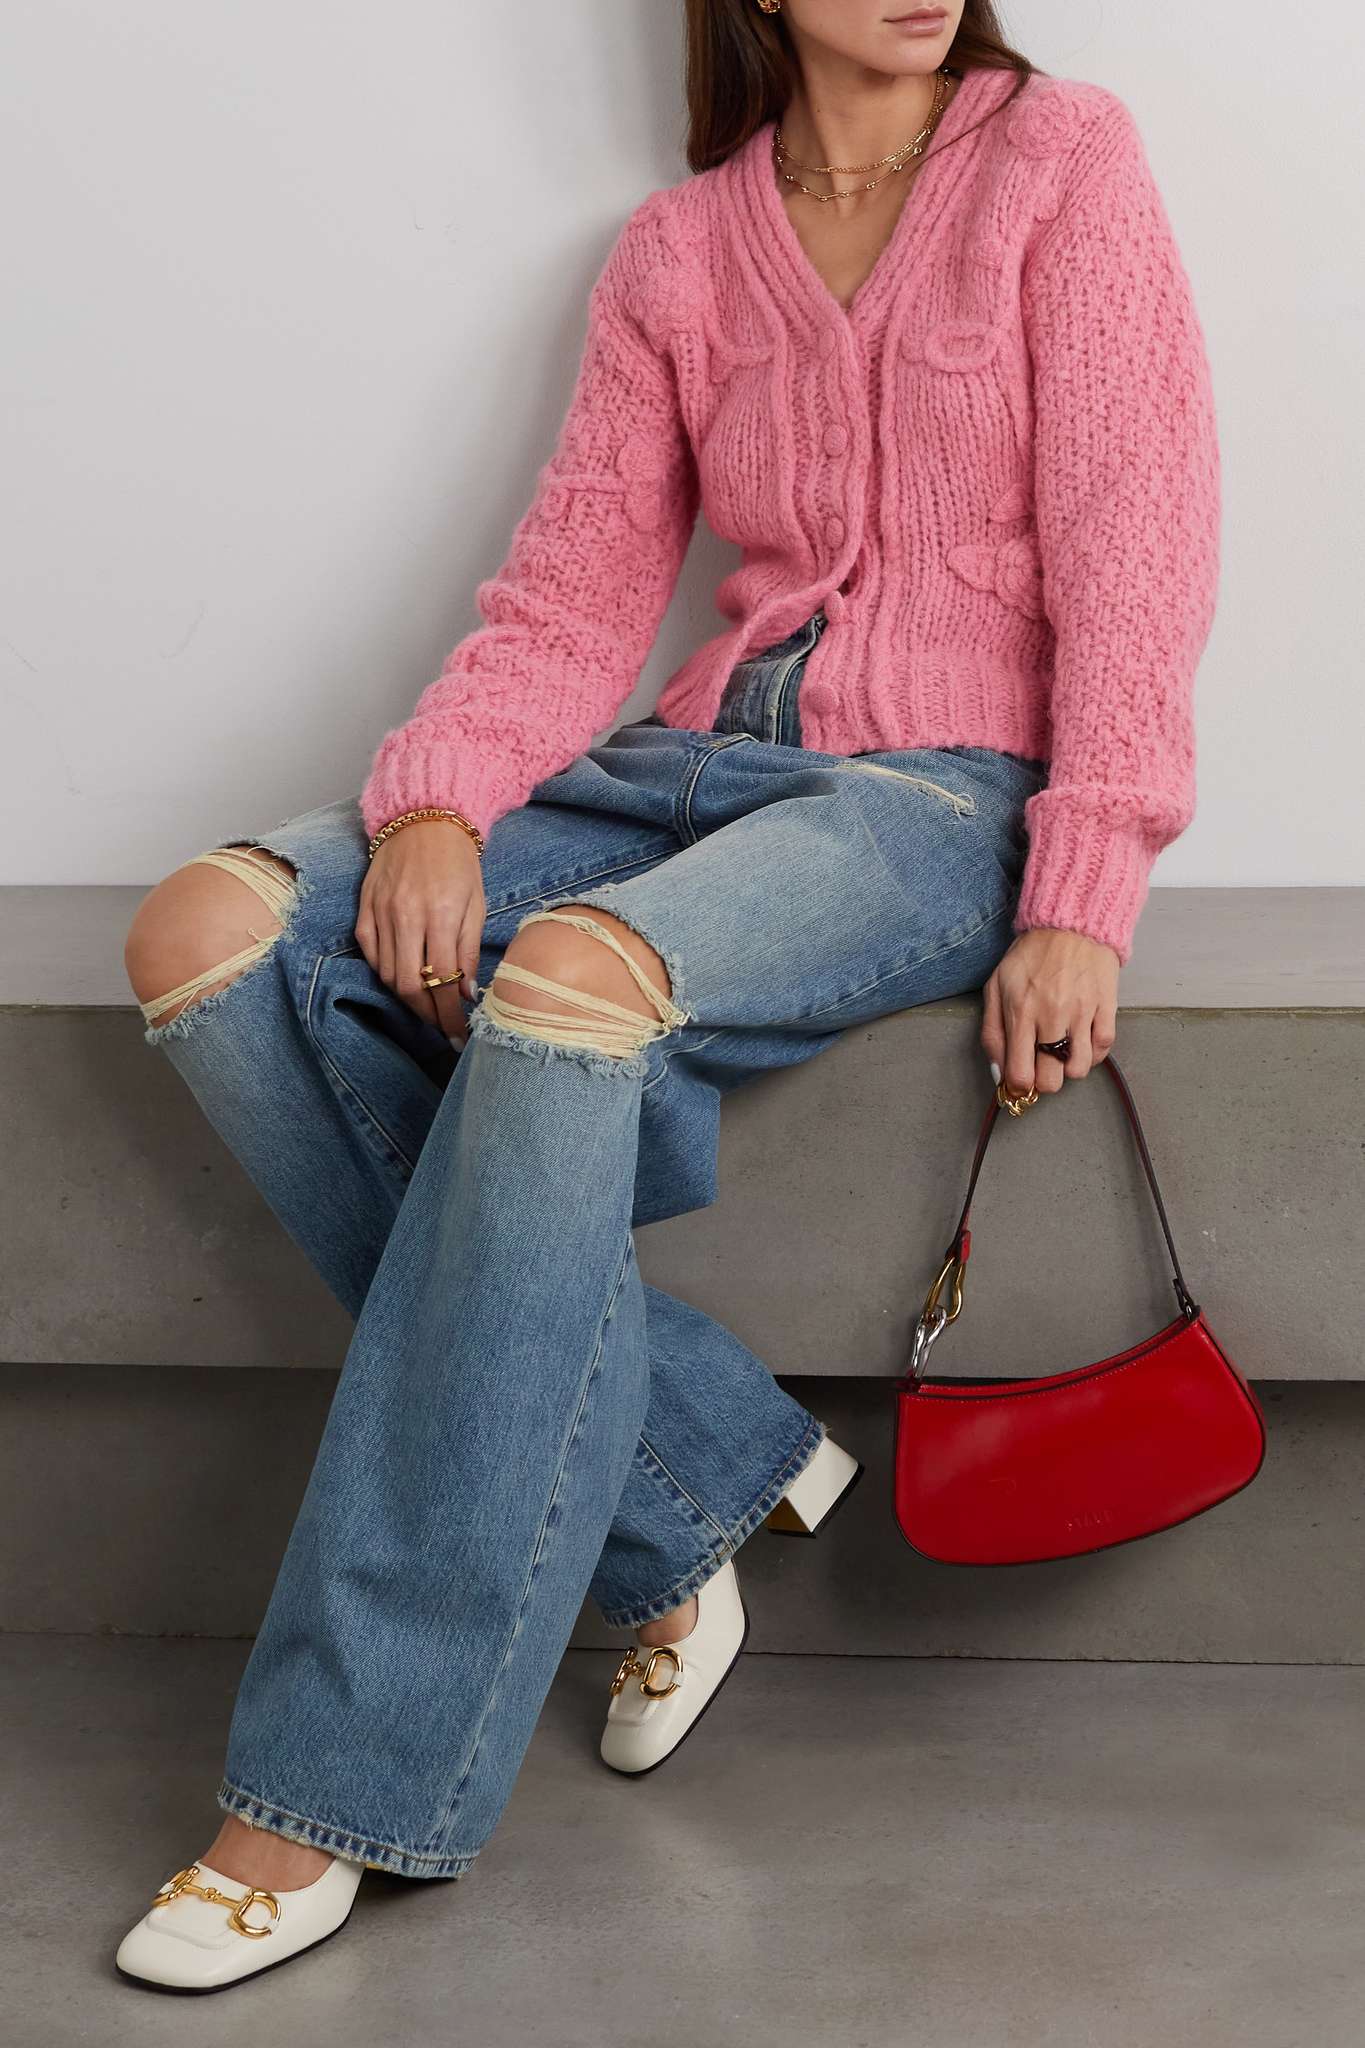 woman wearing a soft pink cardigan with blue bootcut jeans, Gucci pumps and a red handbag